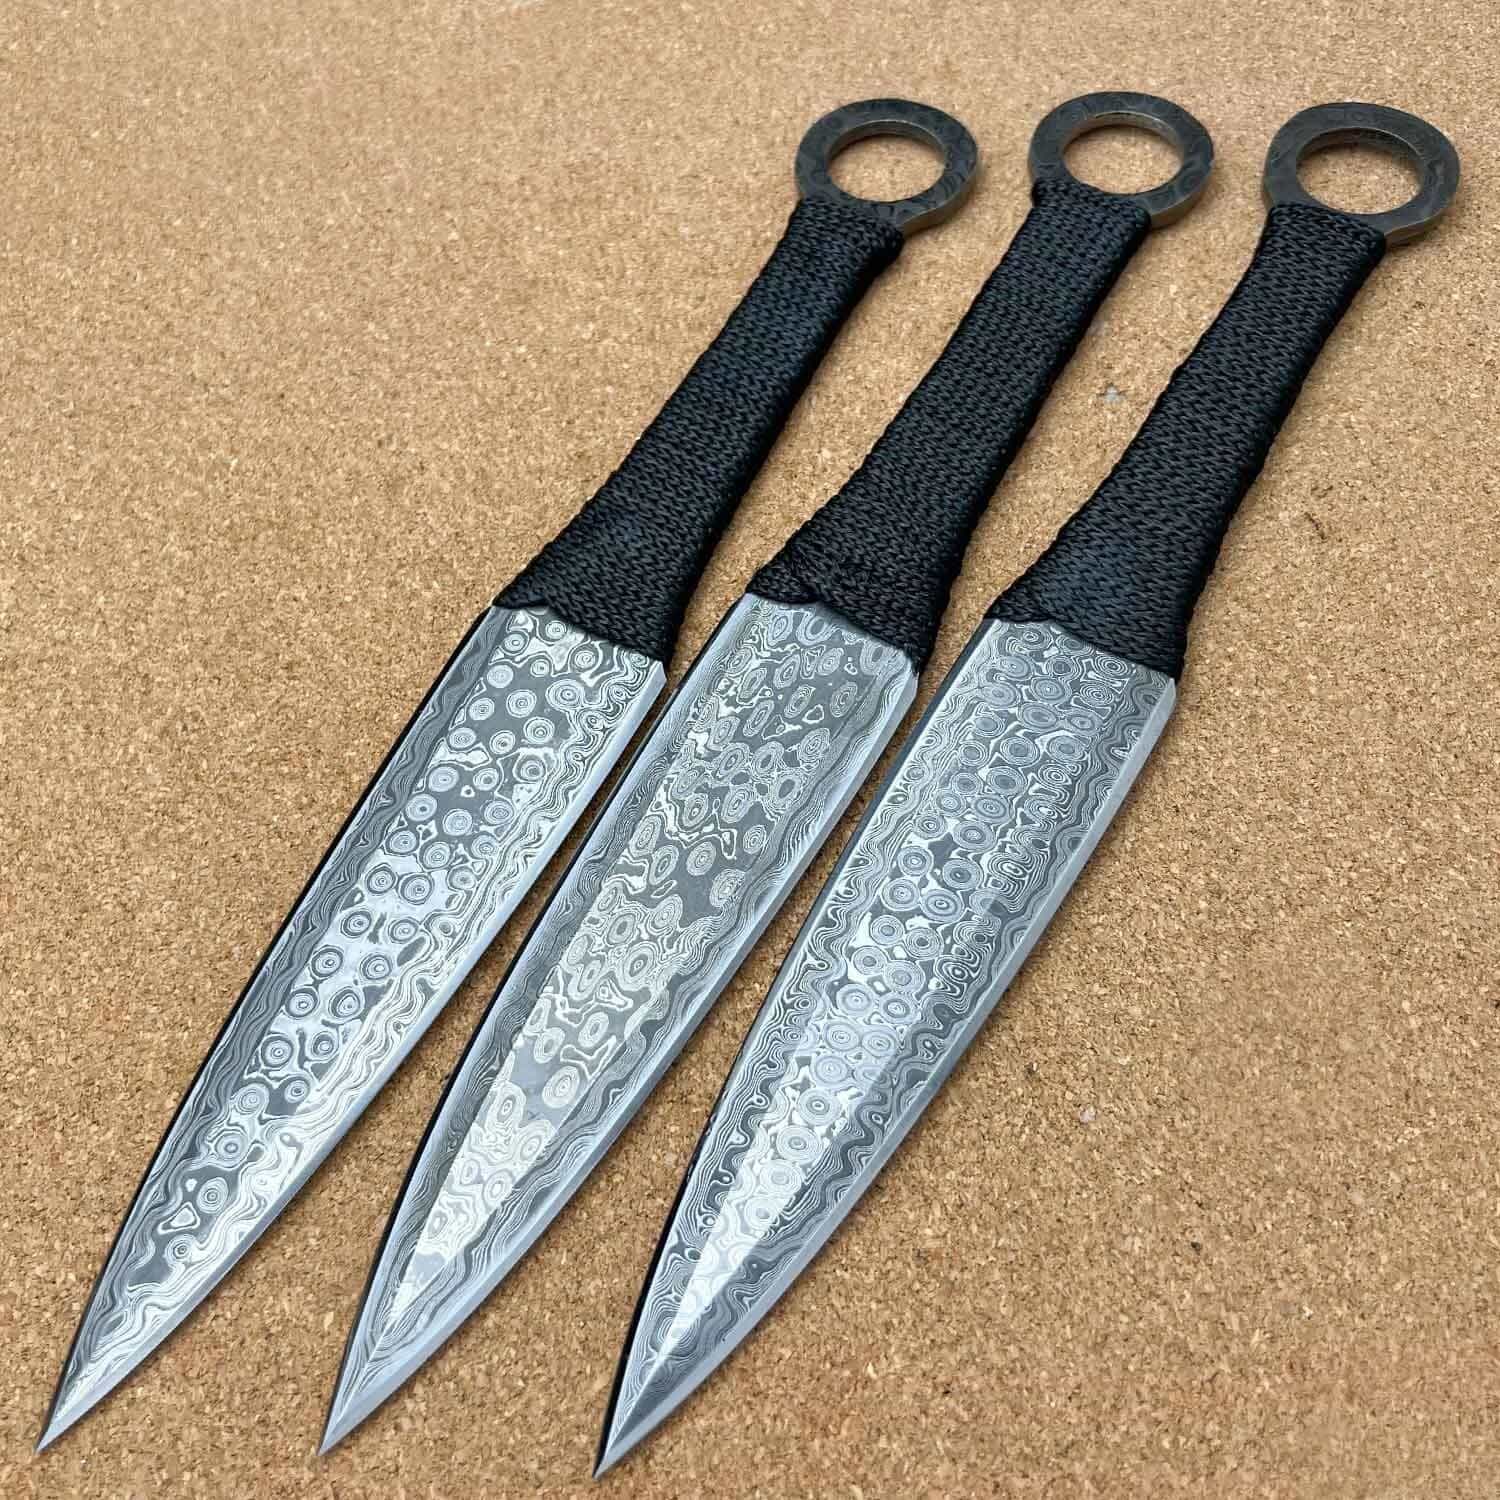 Kunai Throwing Knives -Hand Made Damascus (12 Inches) – Set of 3 w/ Leather Case